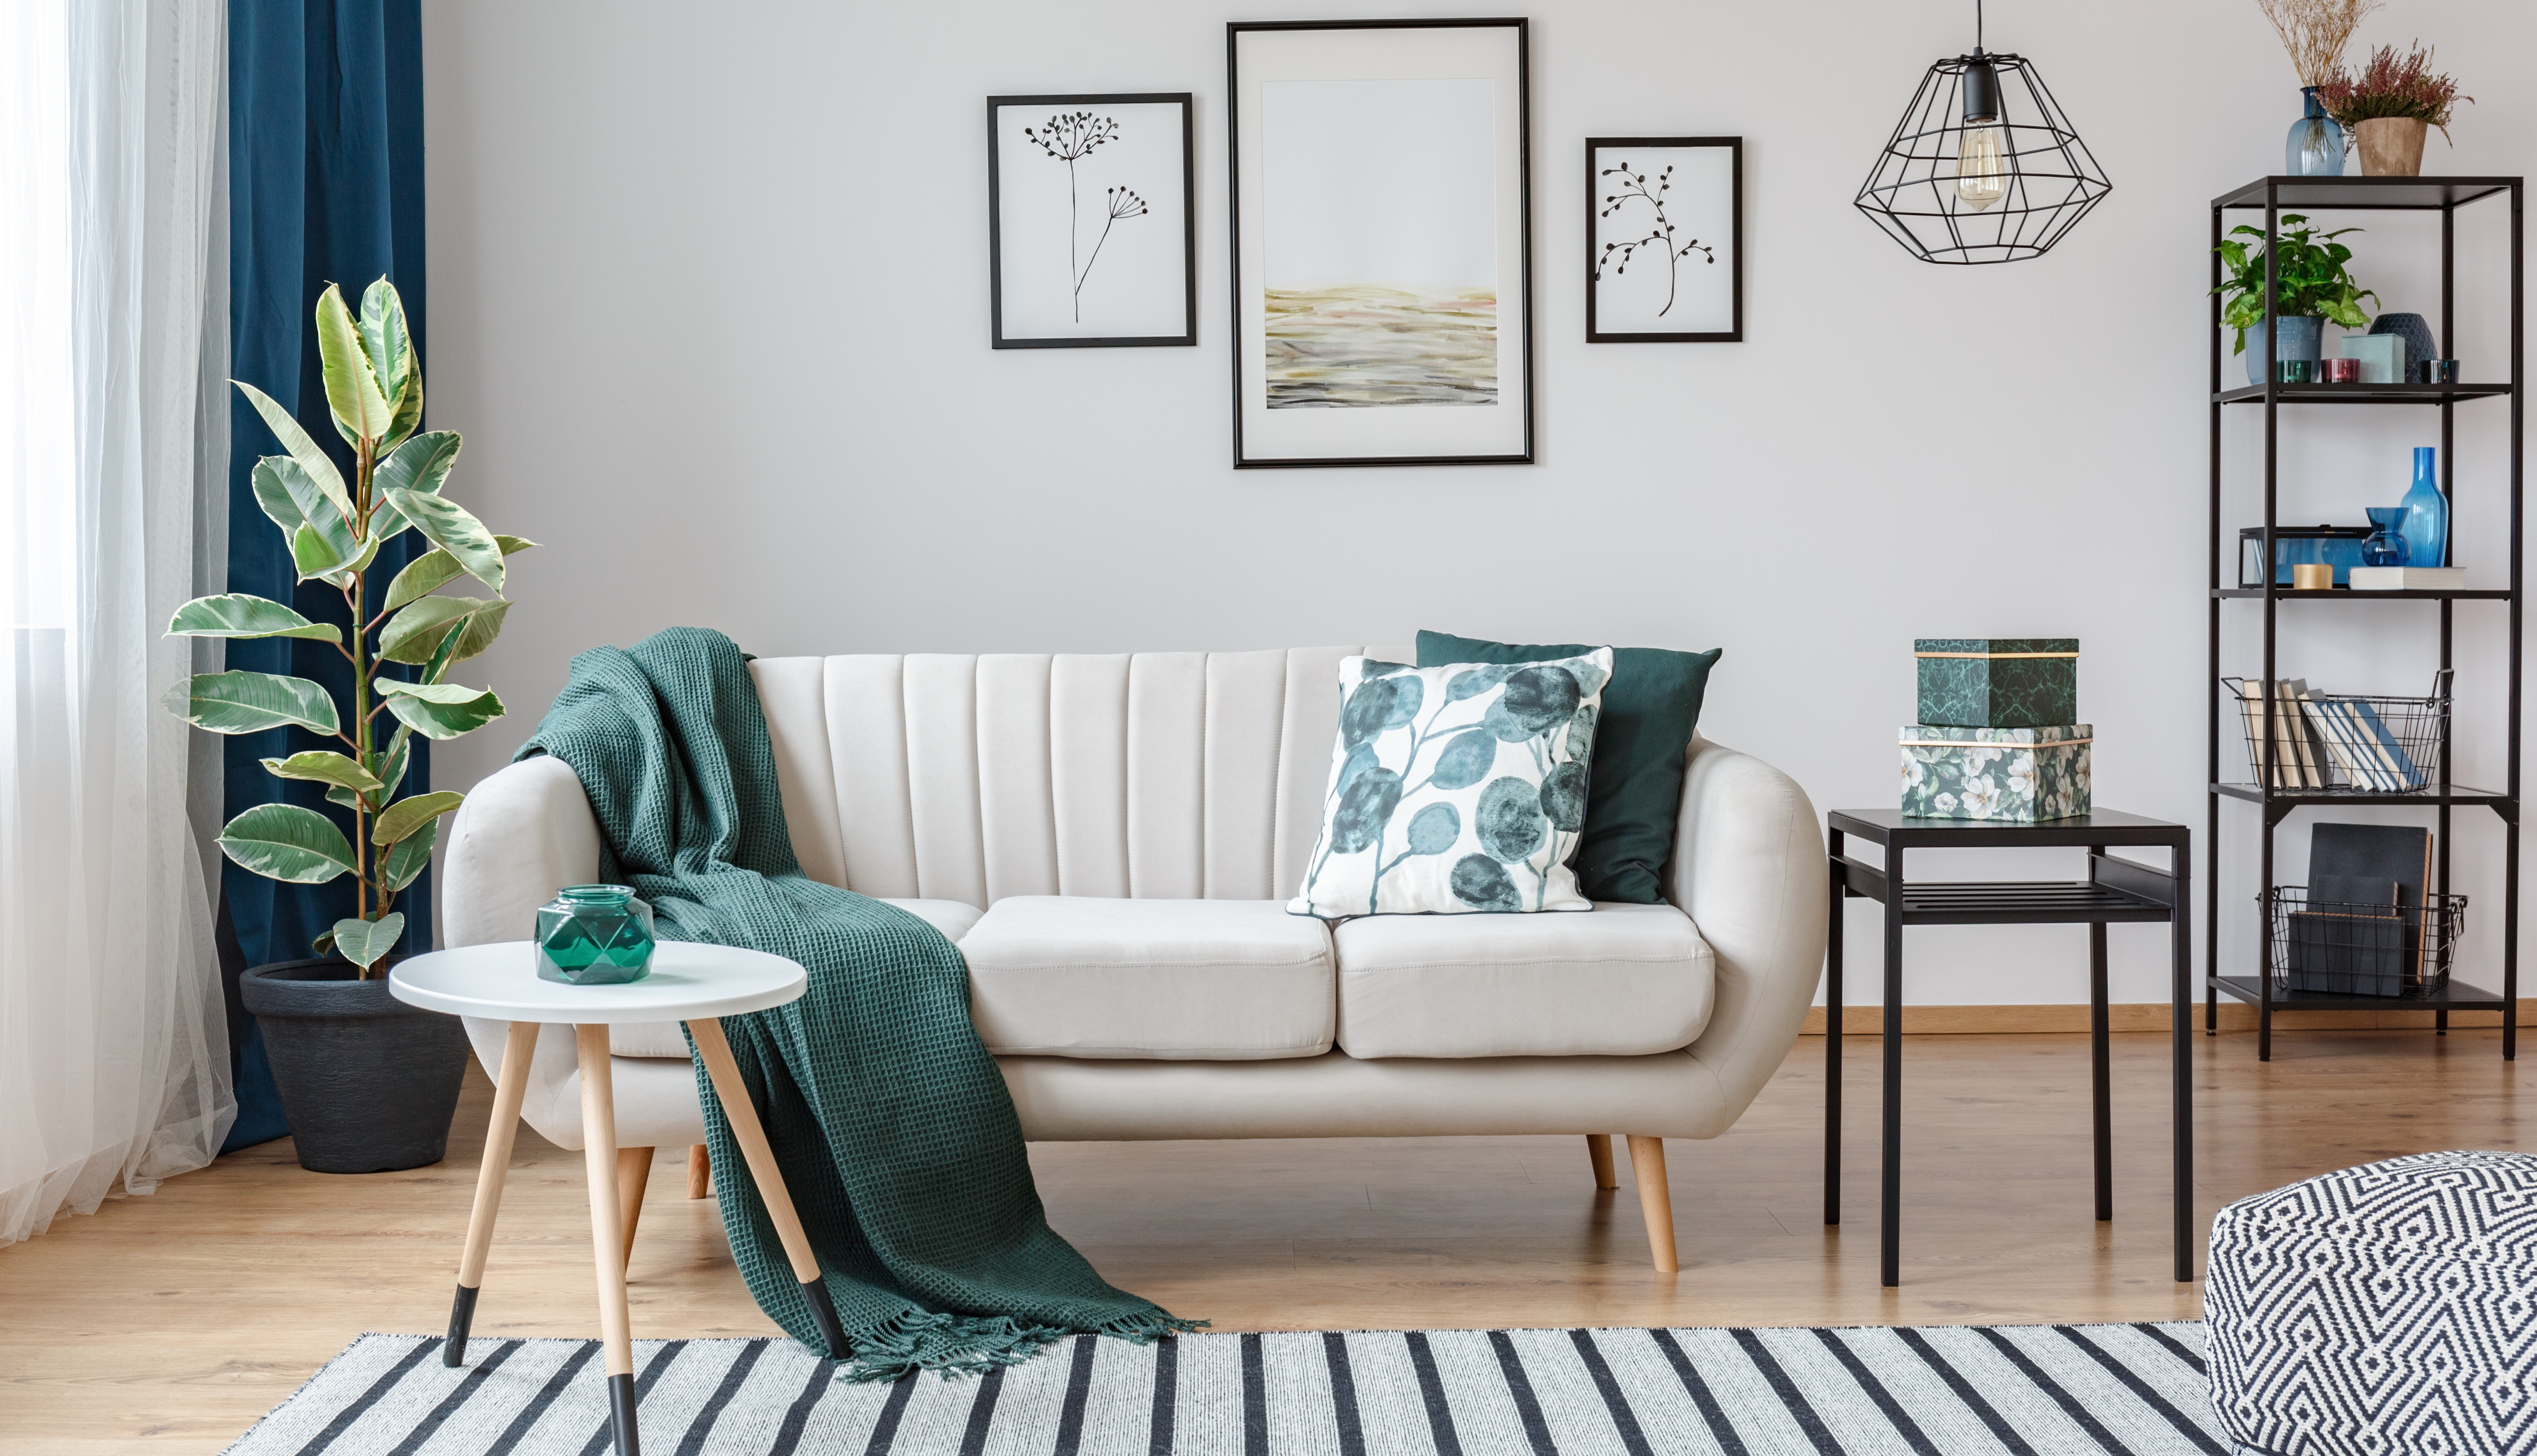 8 Easy Ways to Make Your Apartment Feel Cozier Cover Photo